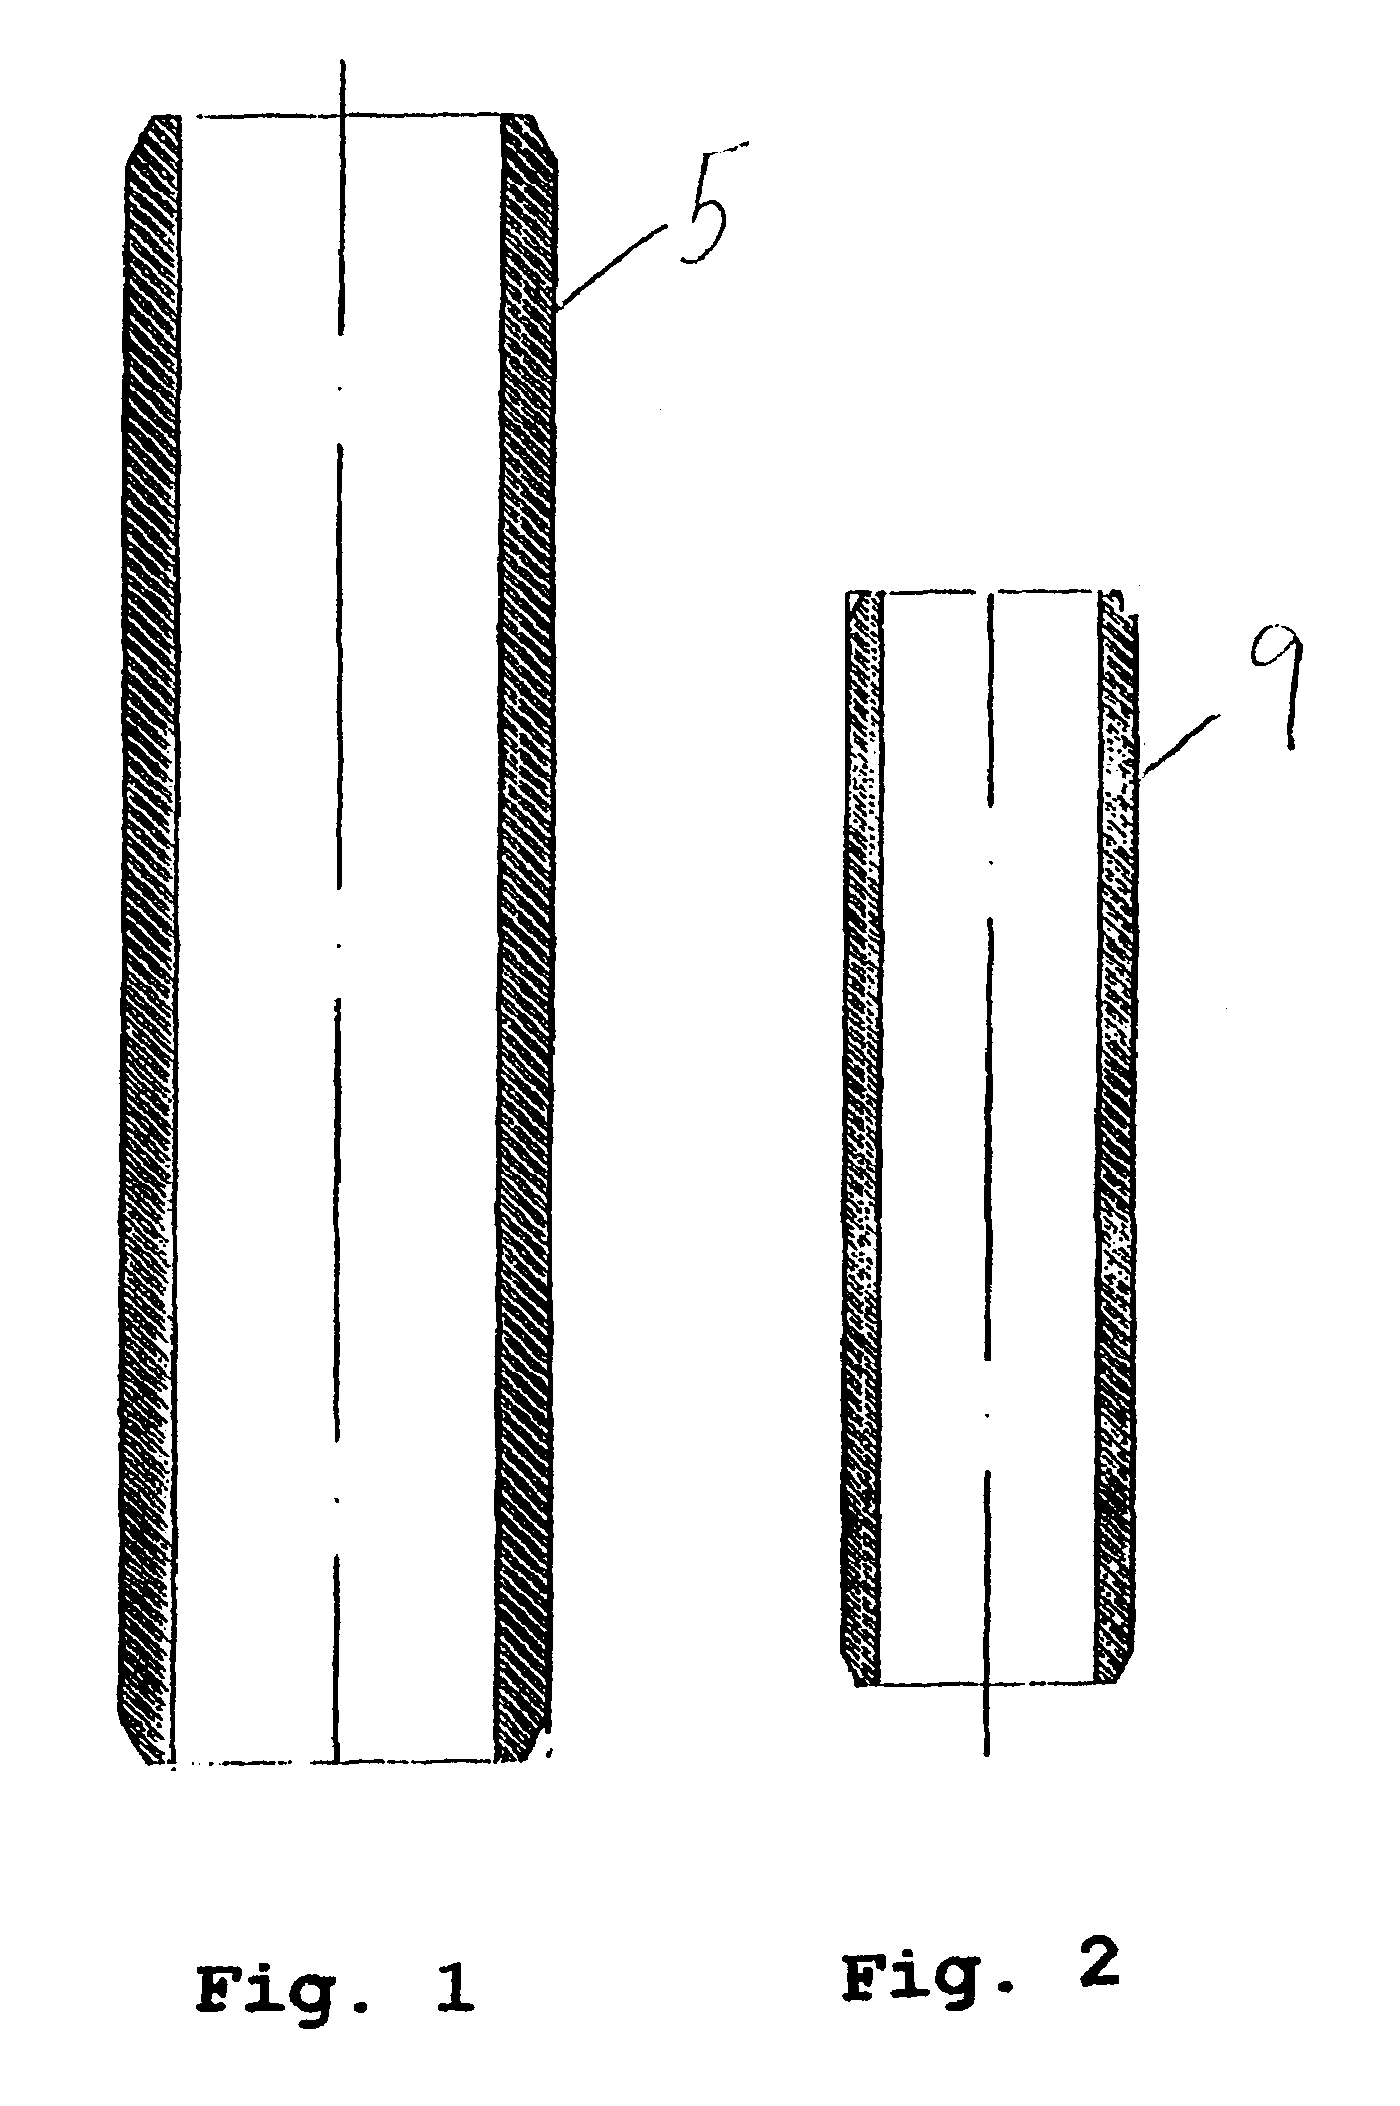 Photocatalytic reactor and process for treating wastewater